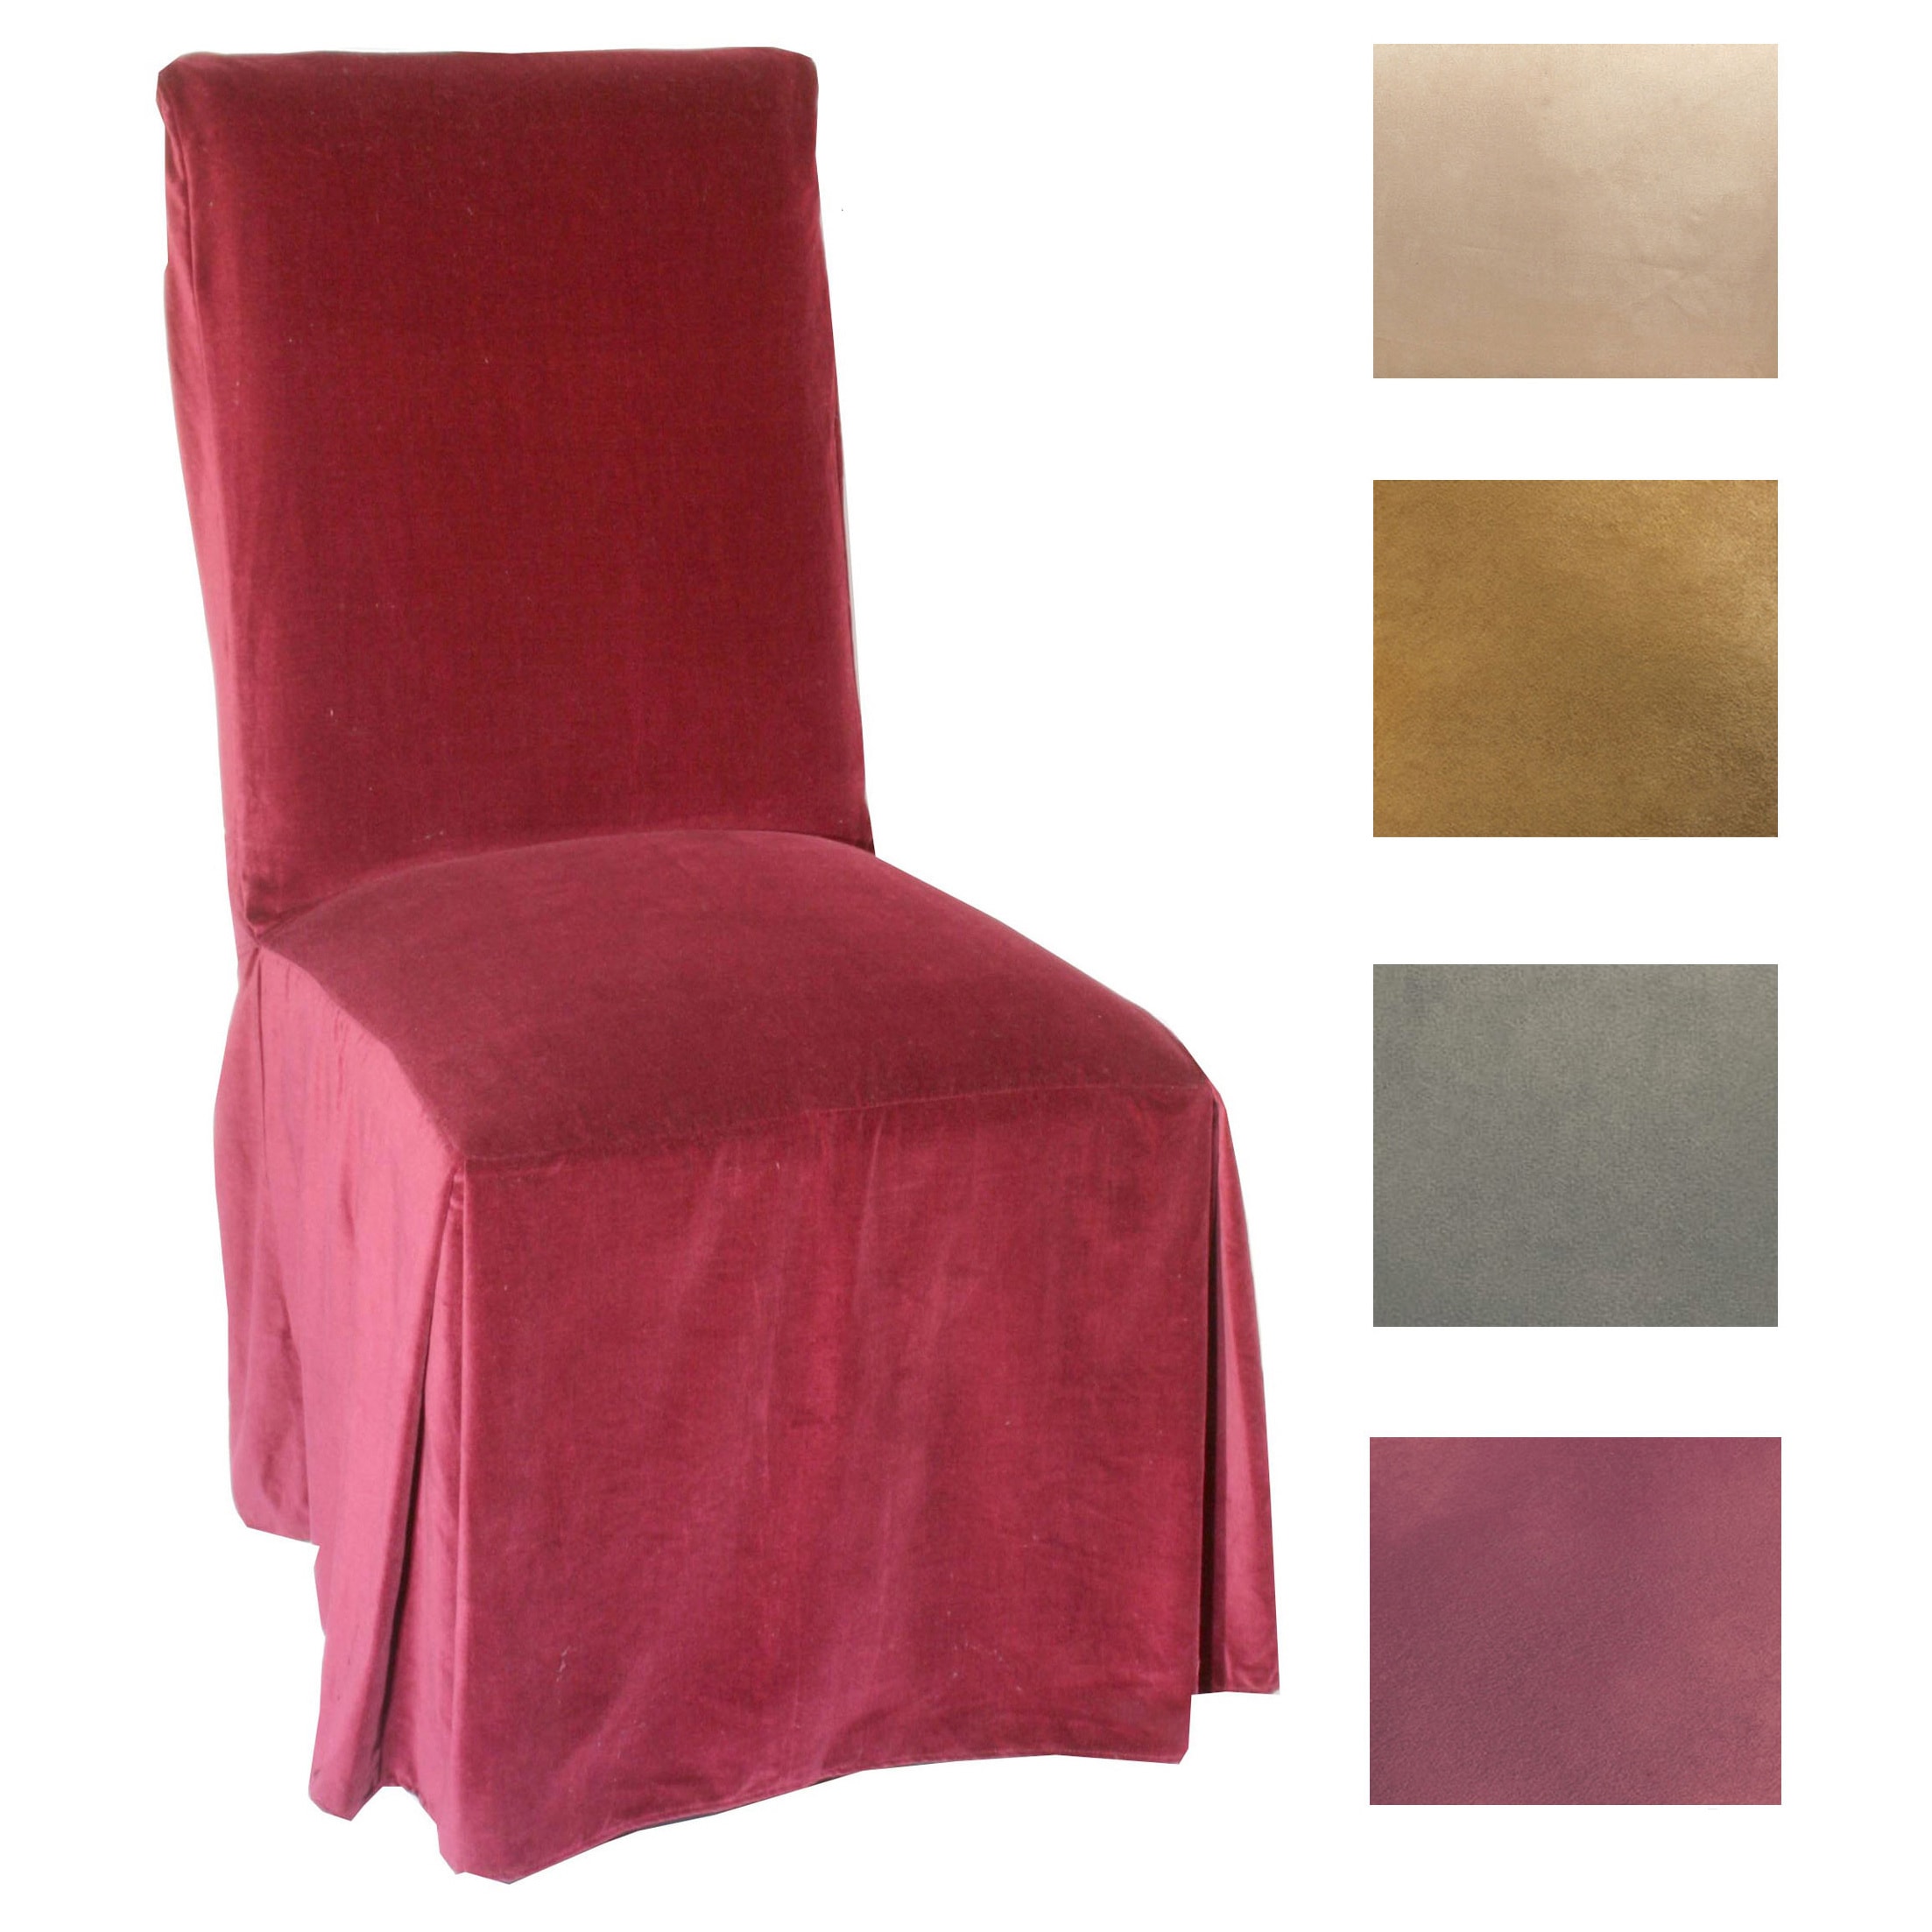 Shop Classic Slipcovers Microsuede Parsons Chair Slipcover Set Of